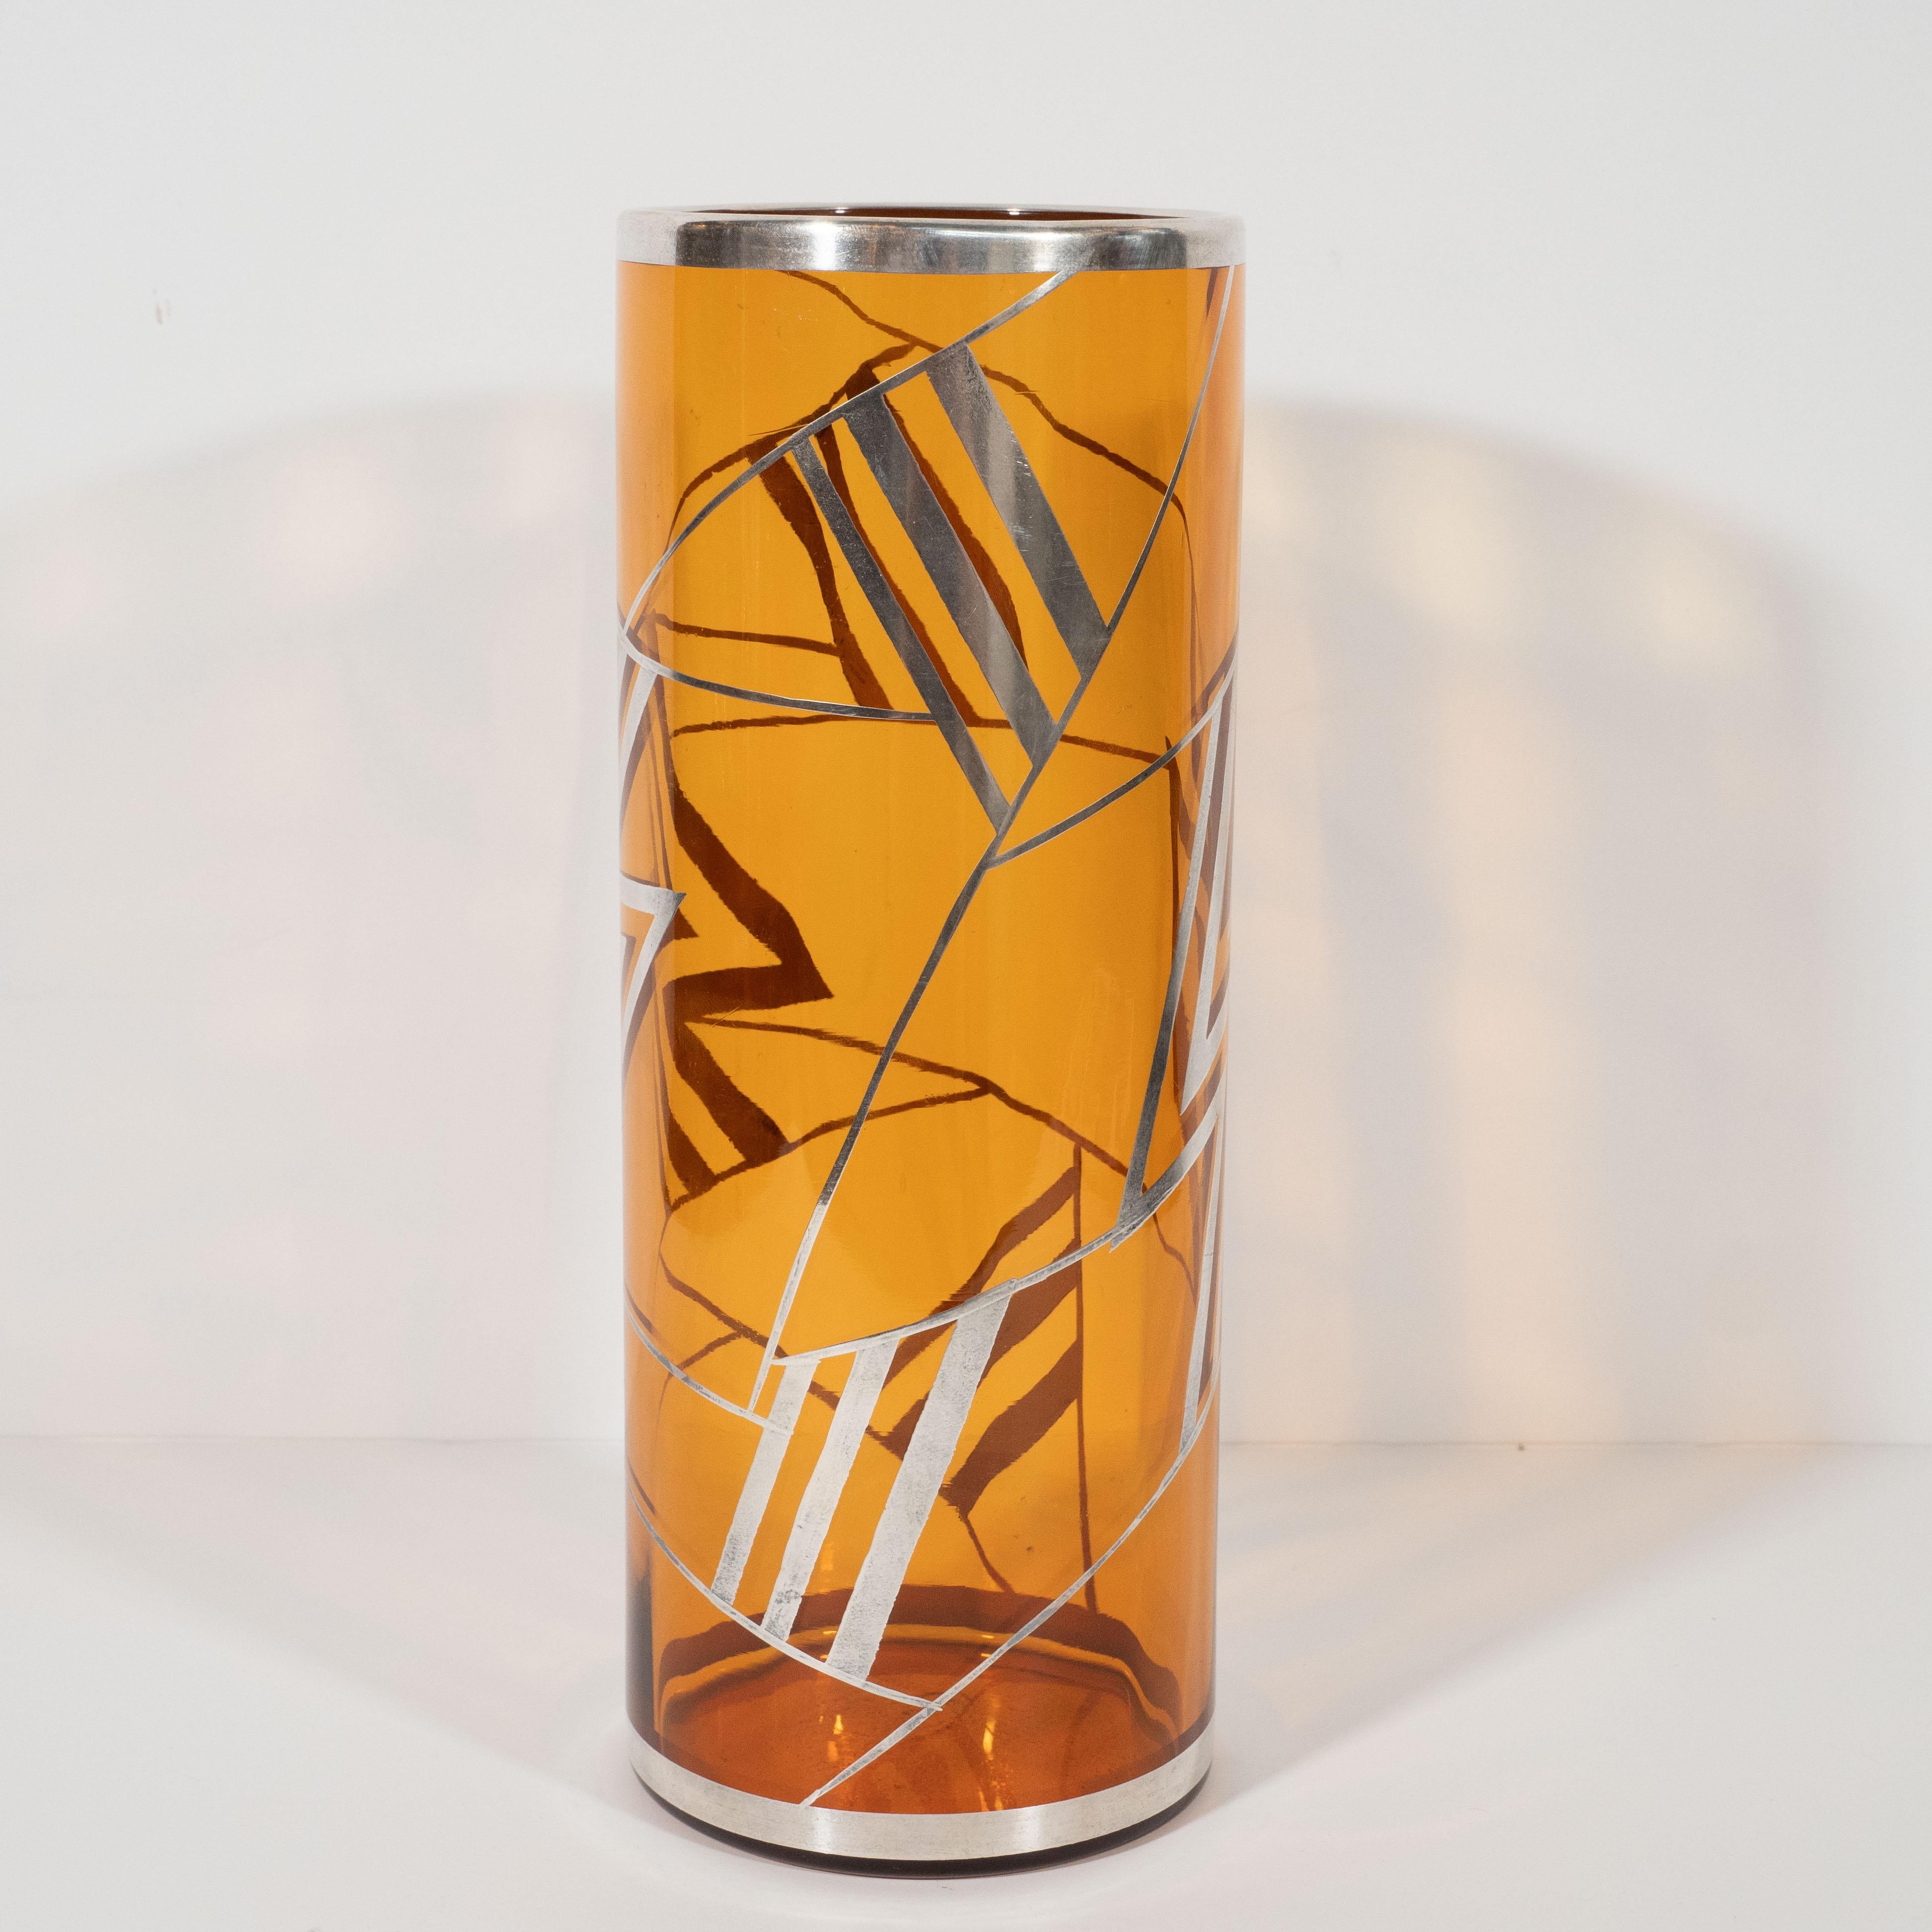 French Art Deco Brown Topaz Glass Vase with Geometric Cubist Sterling Silver Overlays